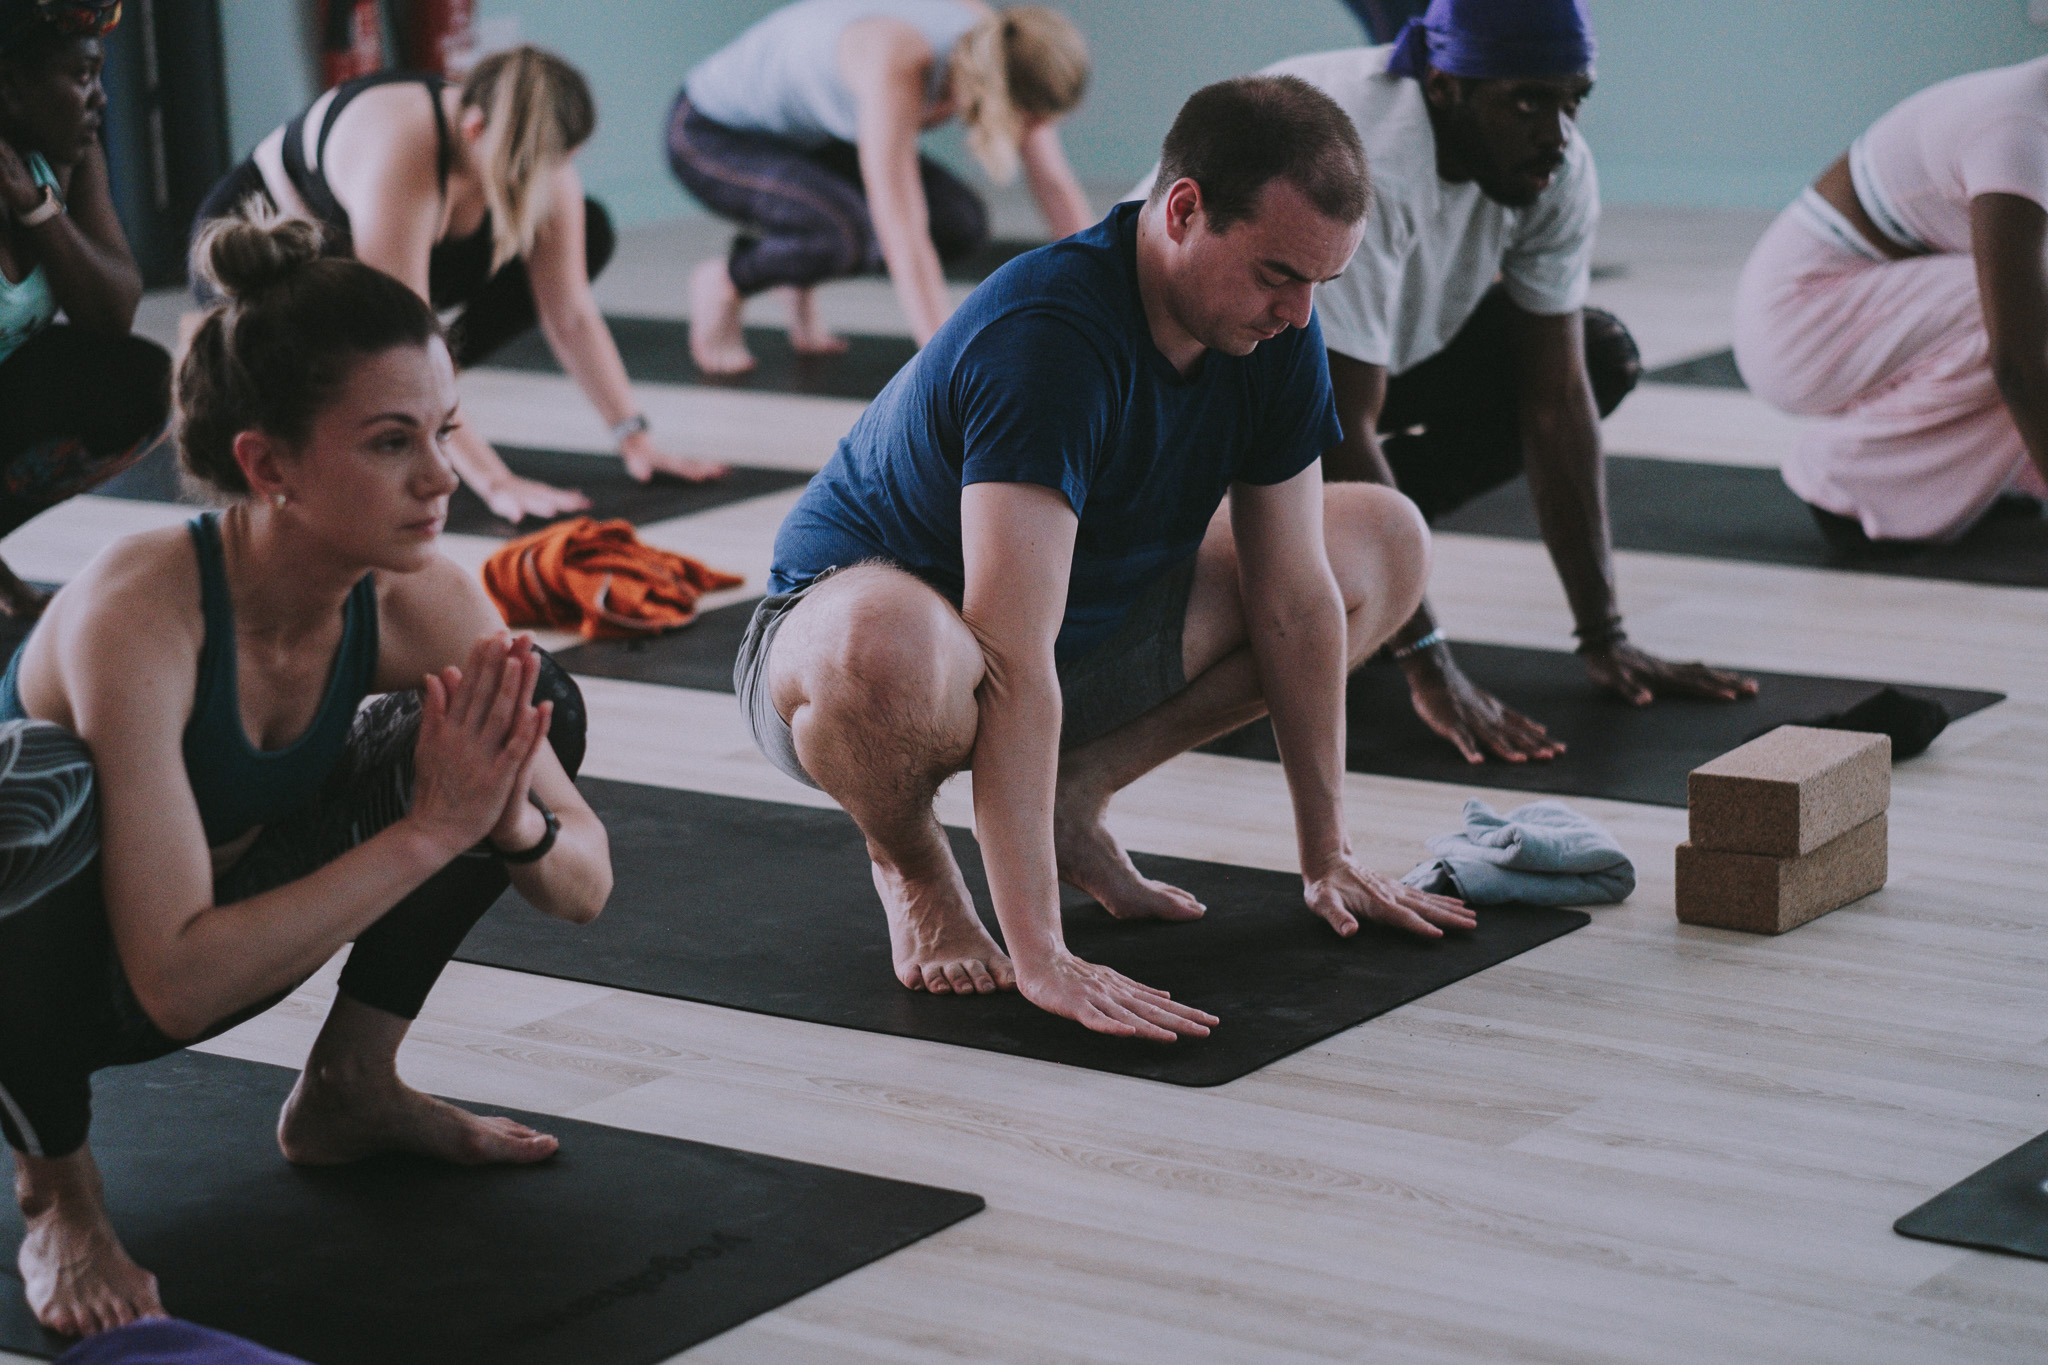 Hot Yoga in Adelaide - Benefits of Hot Yoga Classes